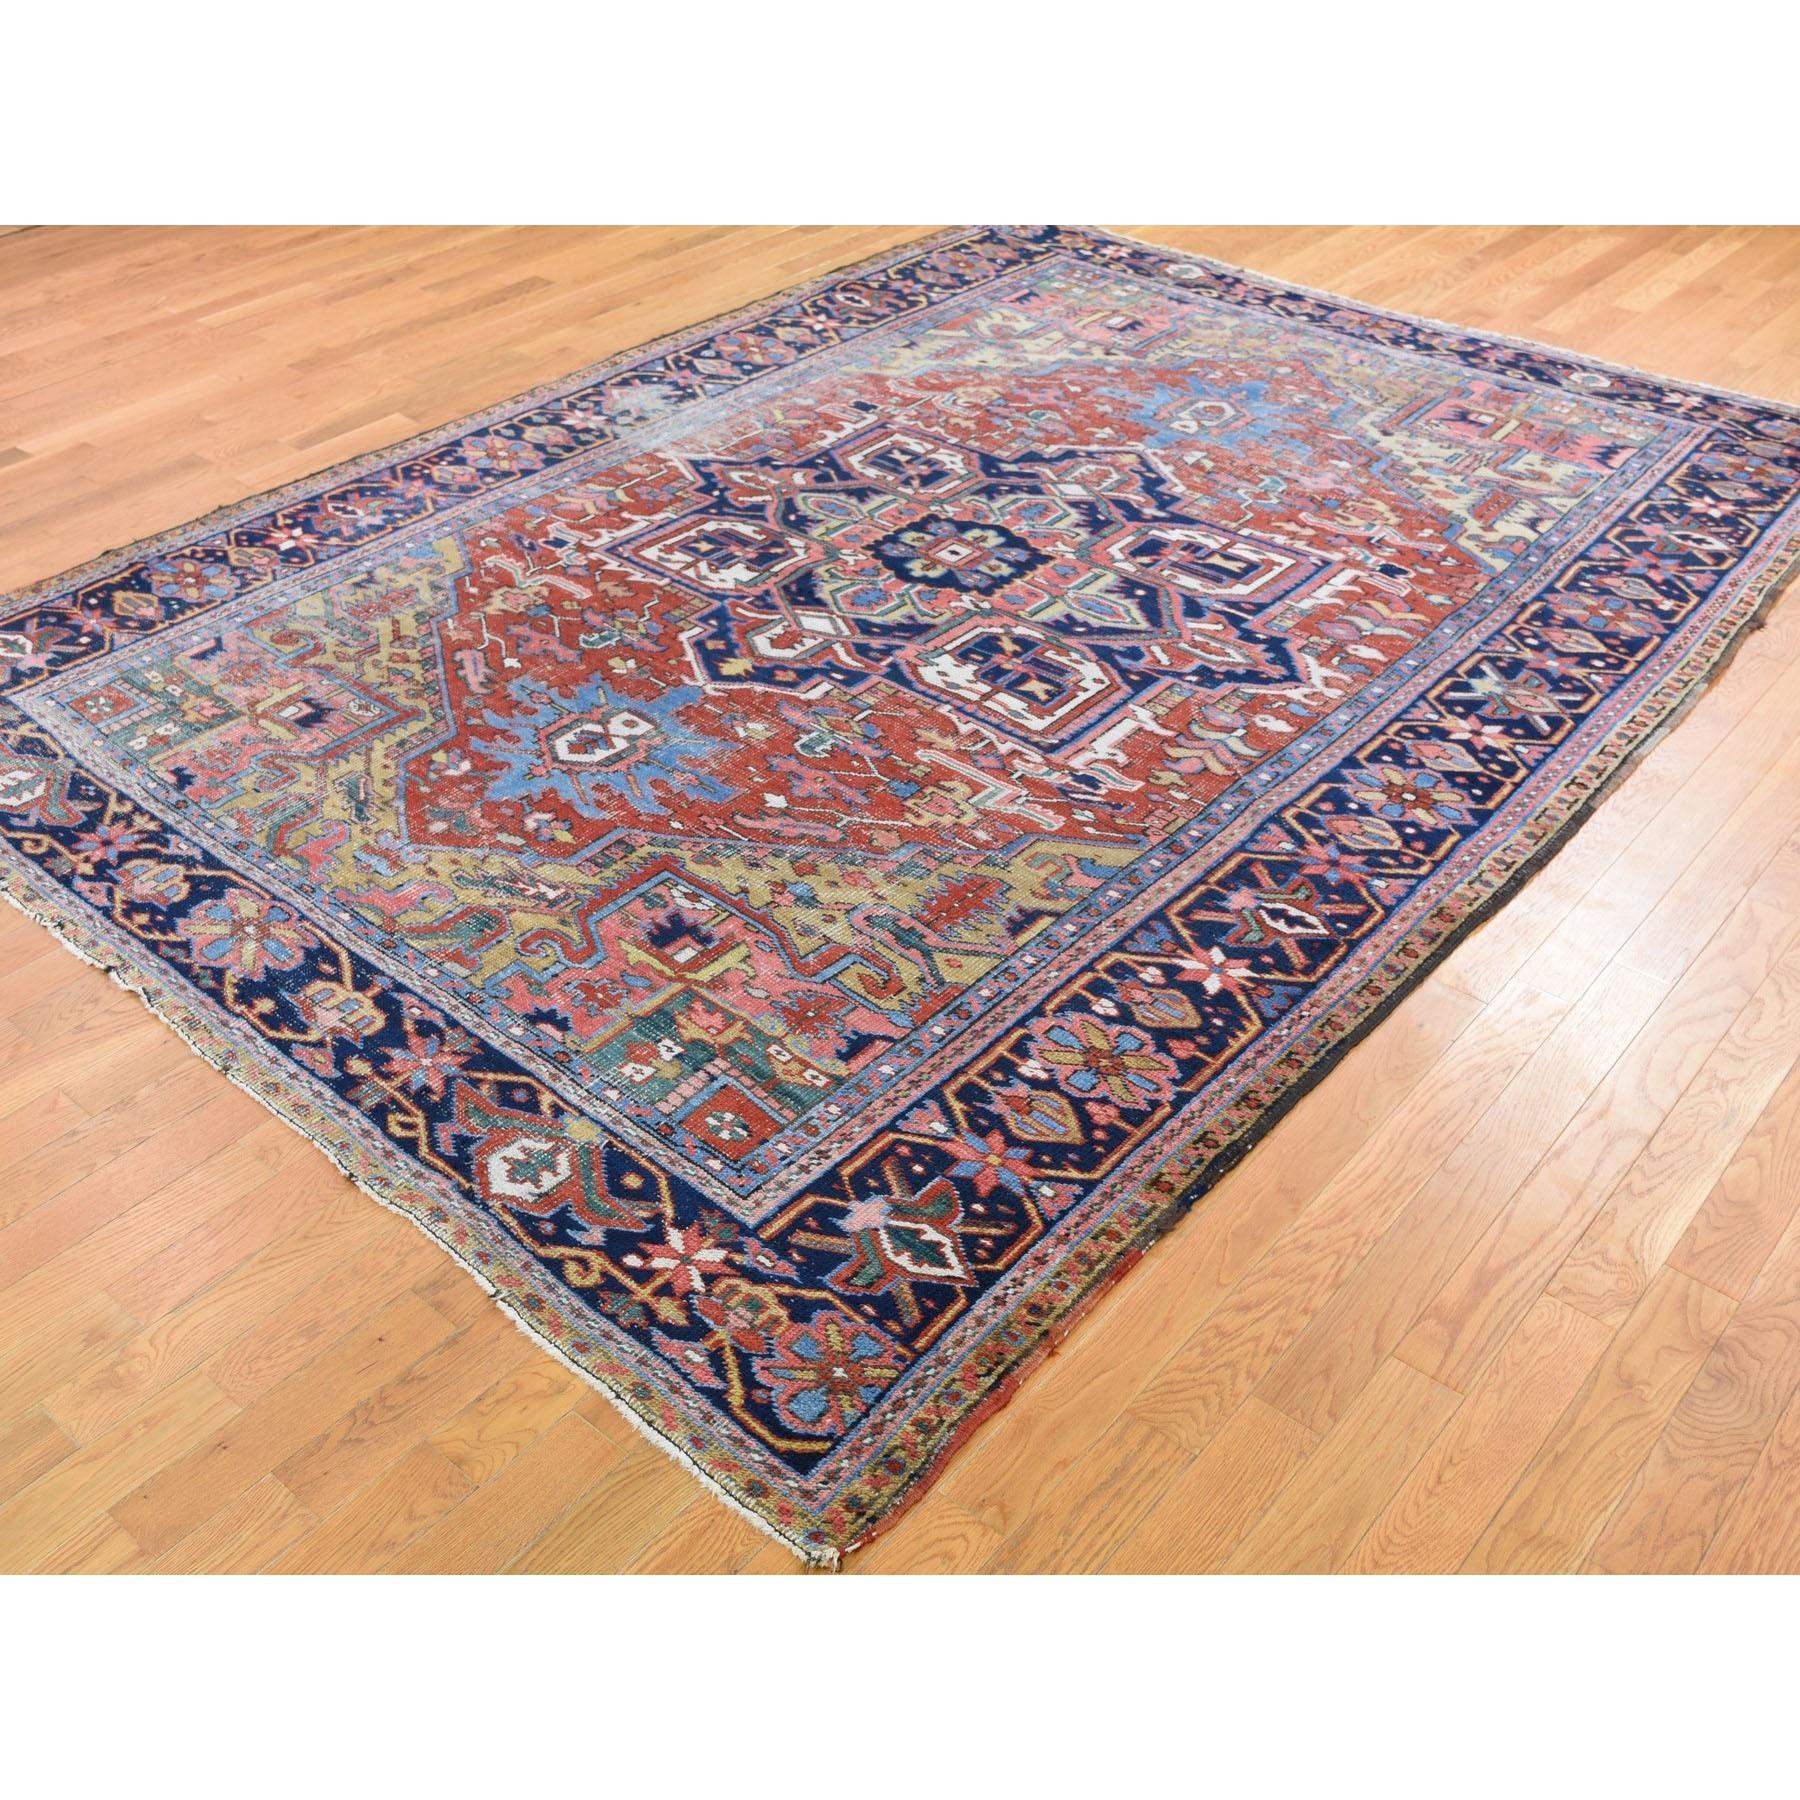 Heriz Serapi Antique Persian Heriz Clean And Worn But No Holes Hand Knotted Oriental Rug